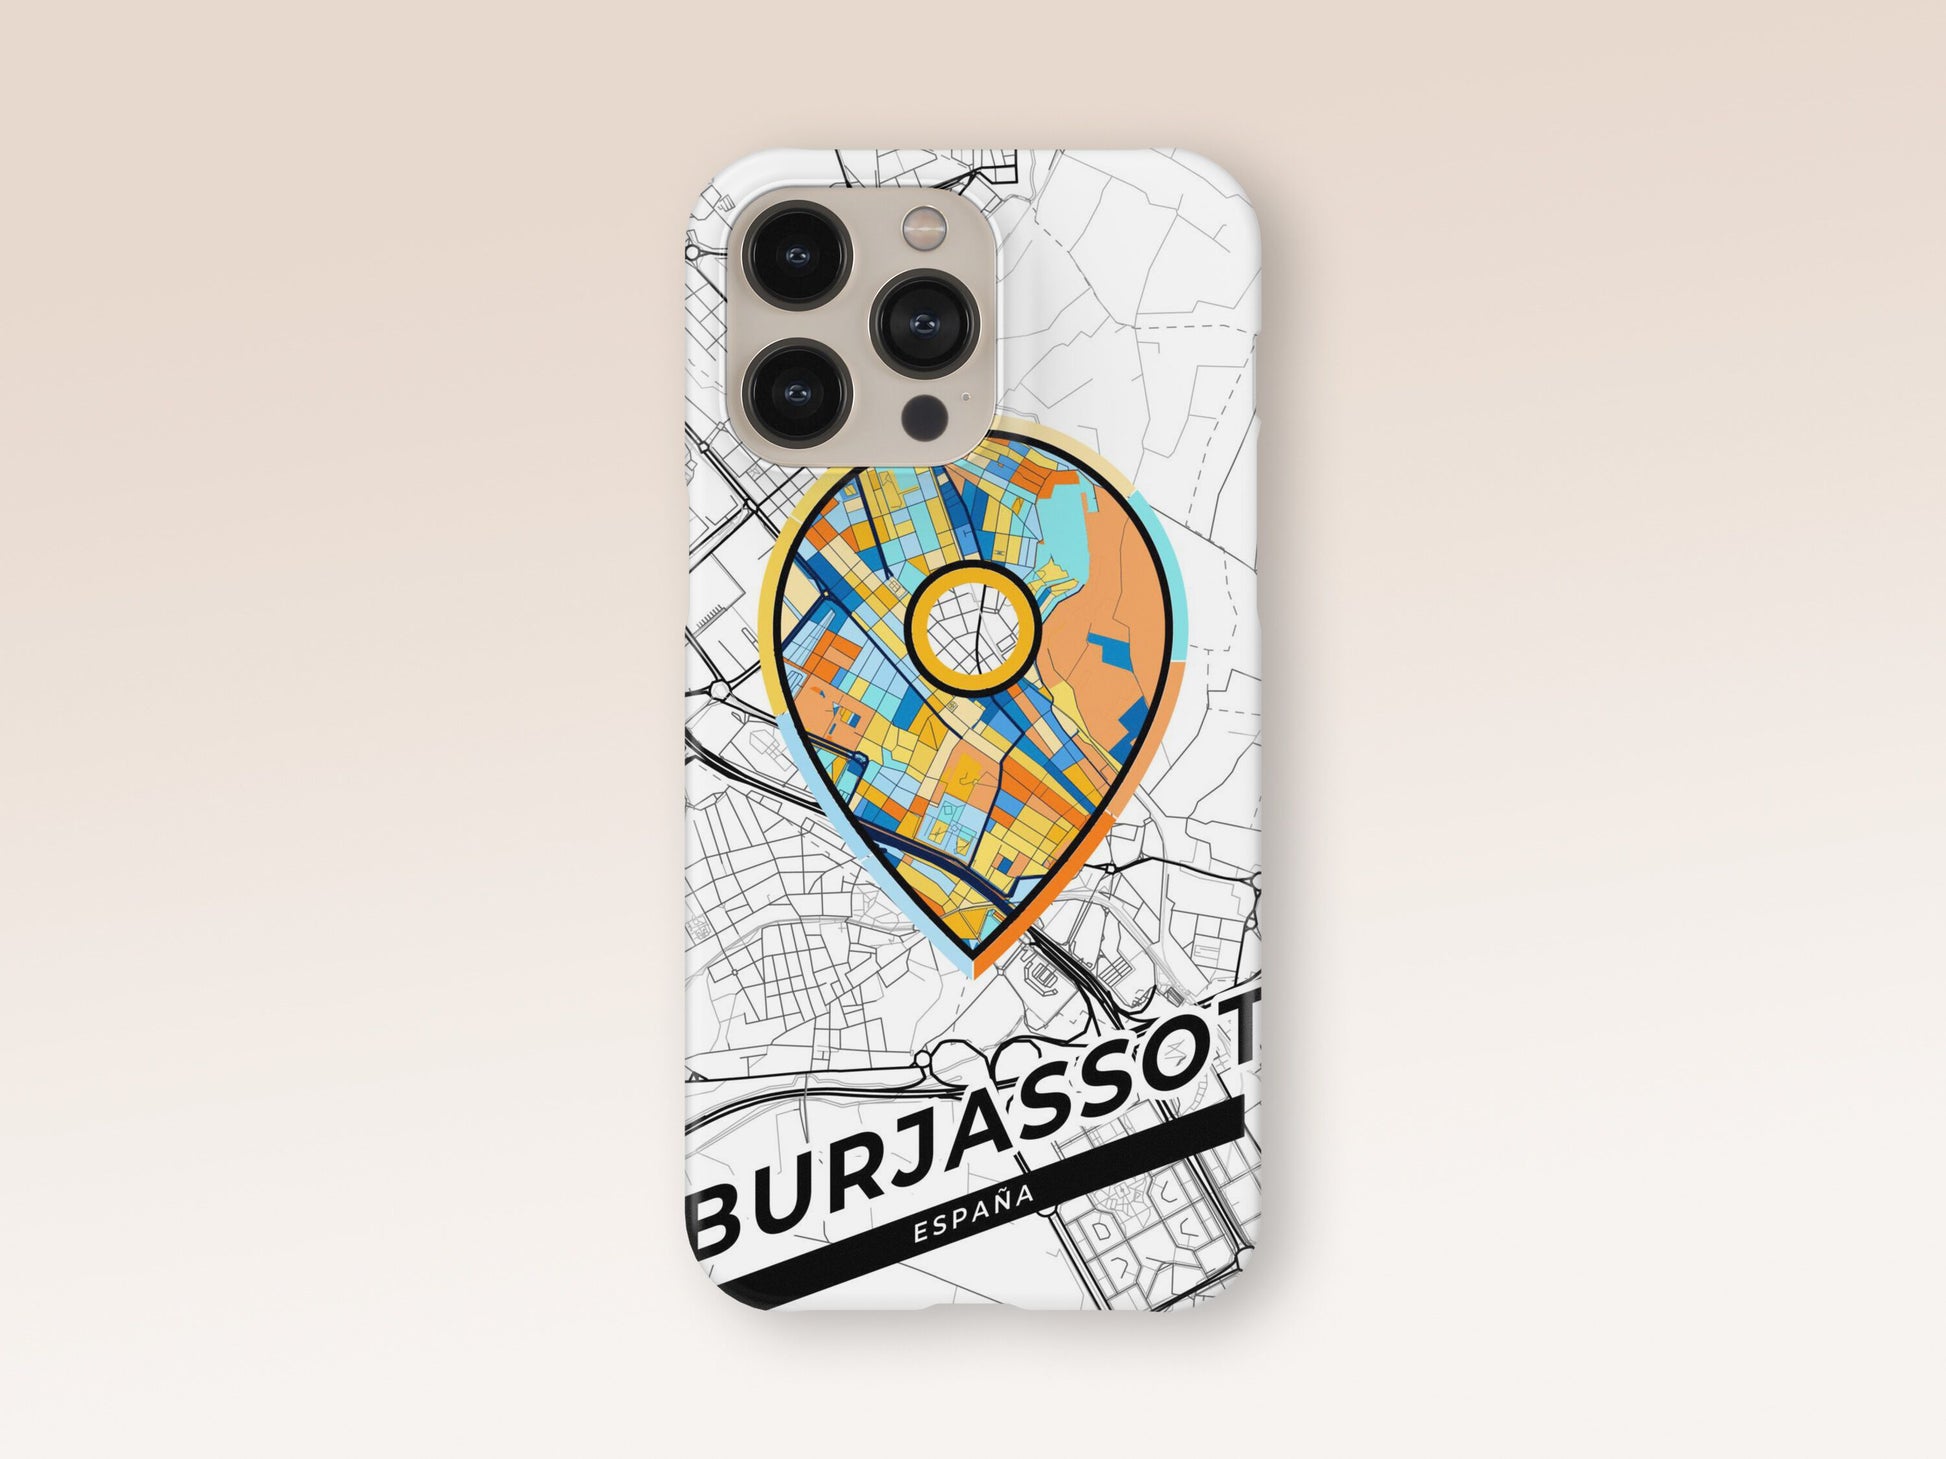 Burjassot Spain slim phone case with colorful icon. Birthday, wedding or housewarming gift. Couple match cases. 1